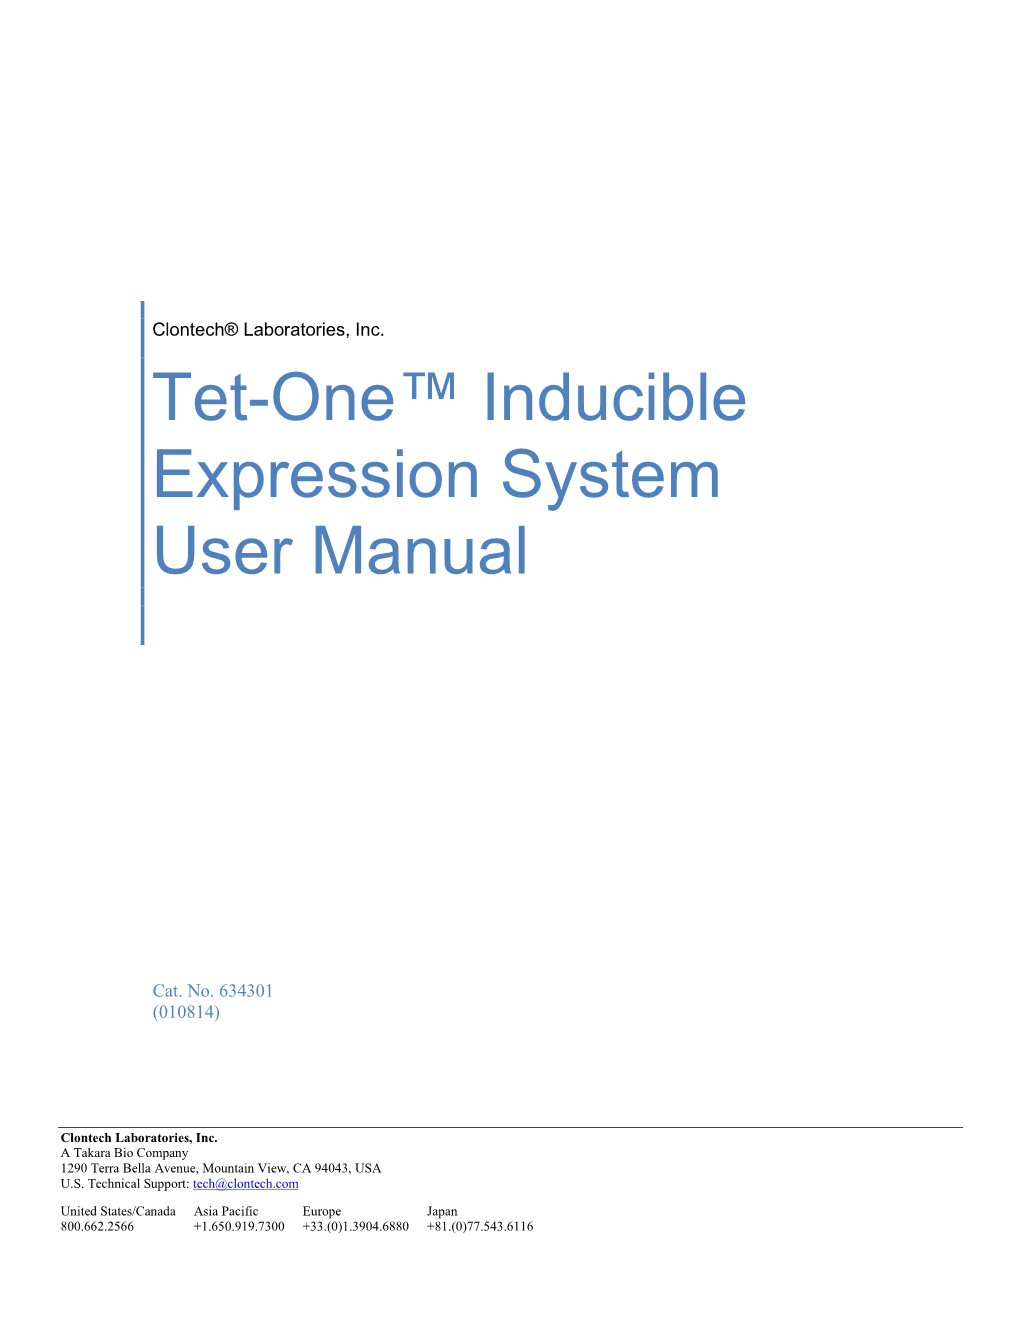 Tet-One™ Inducible Expression System User Manual